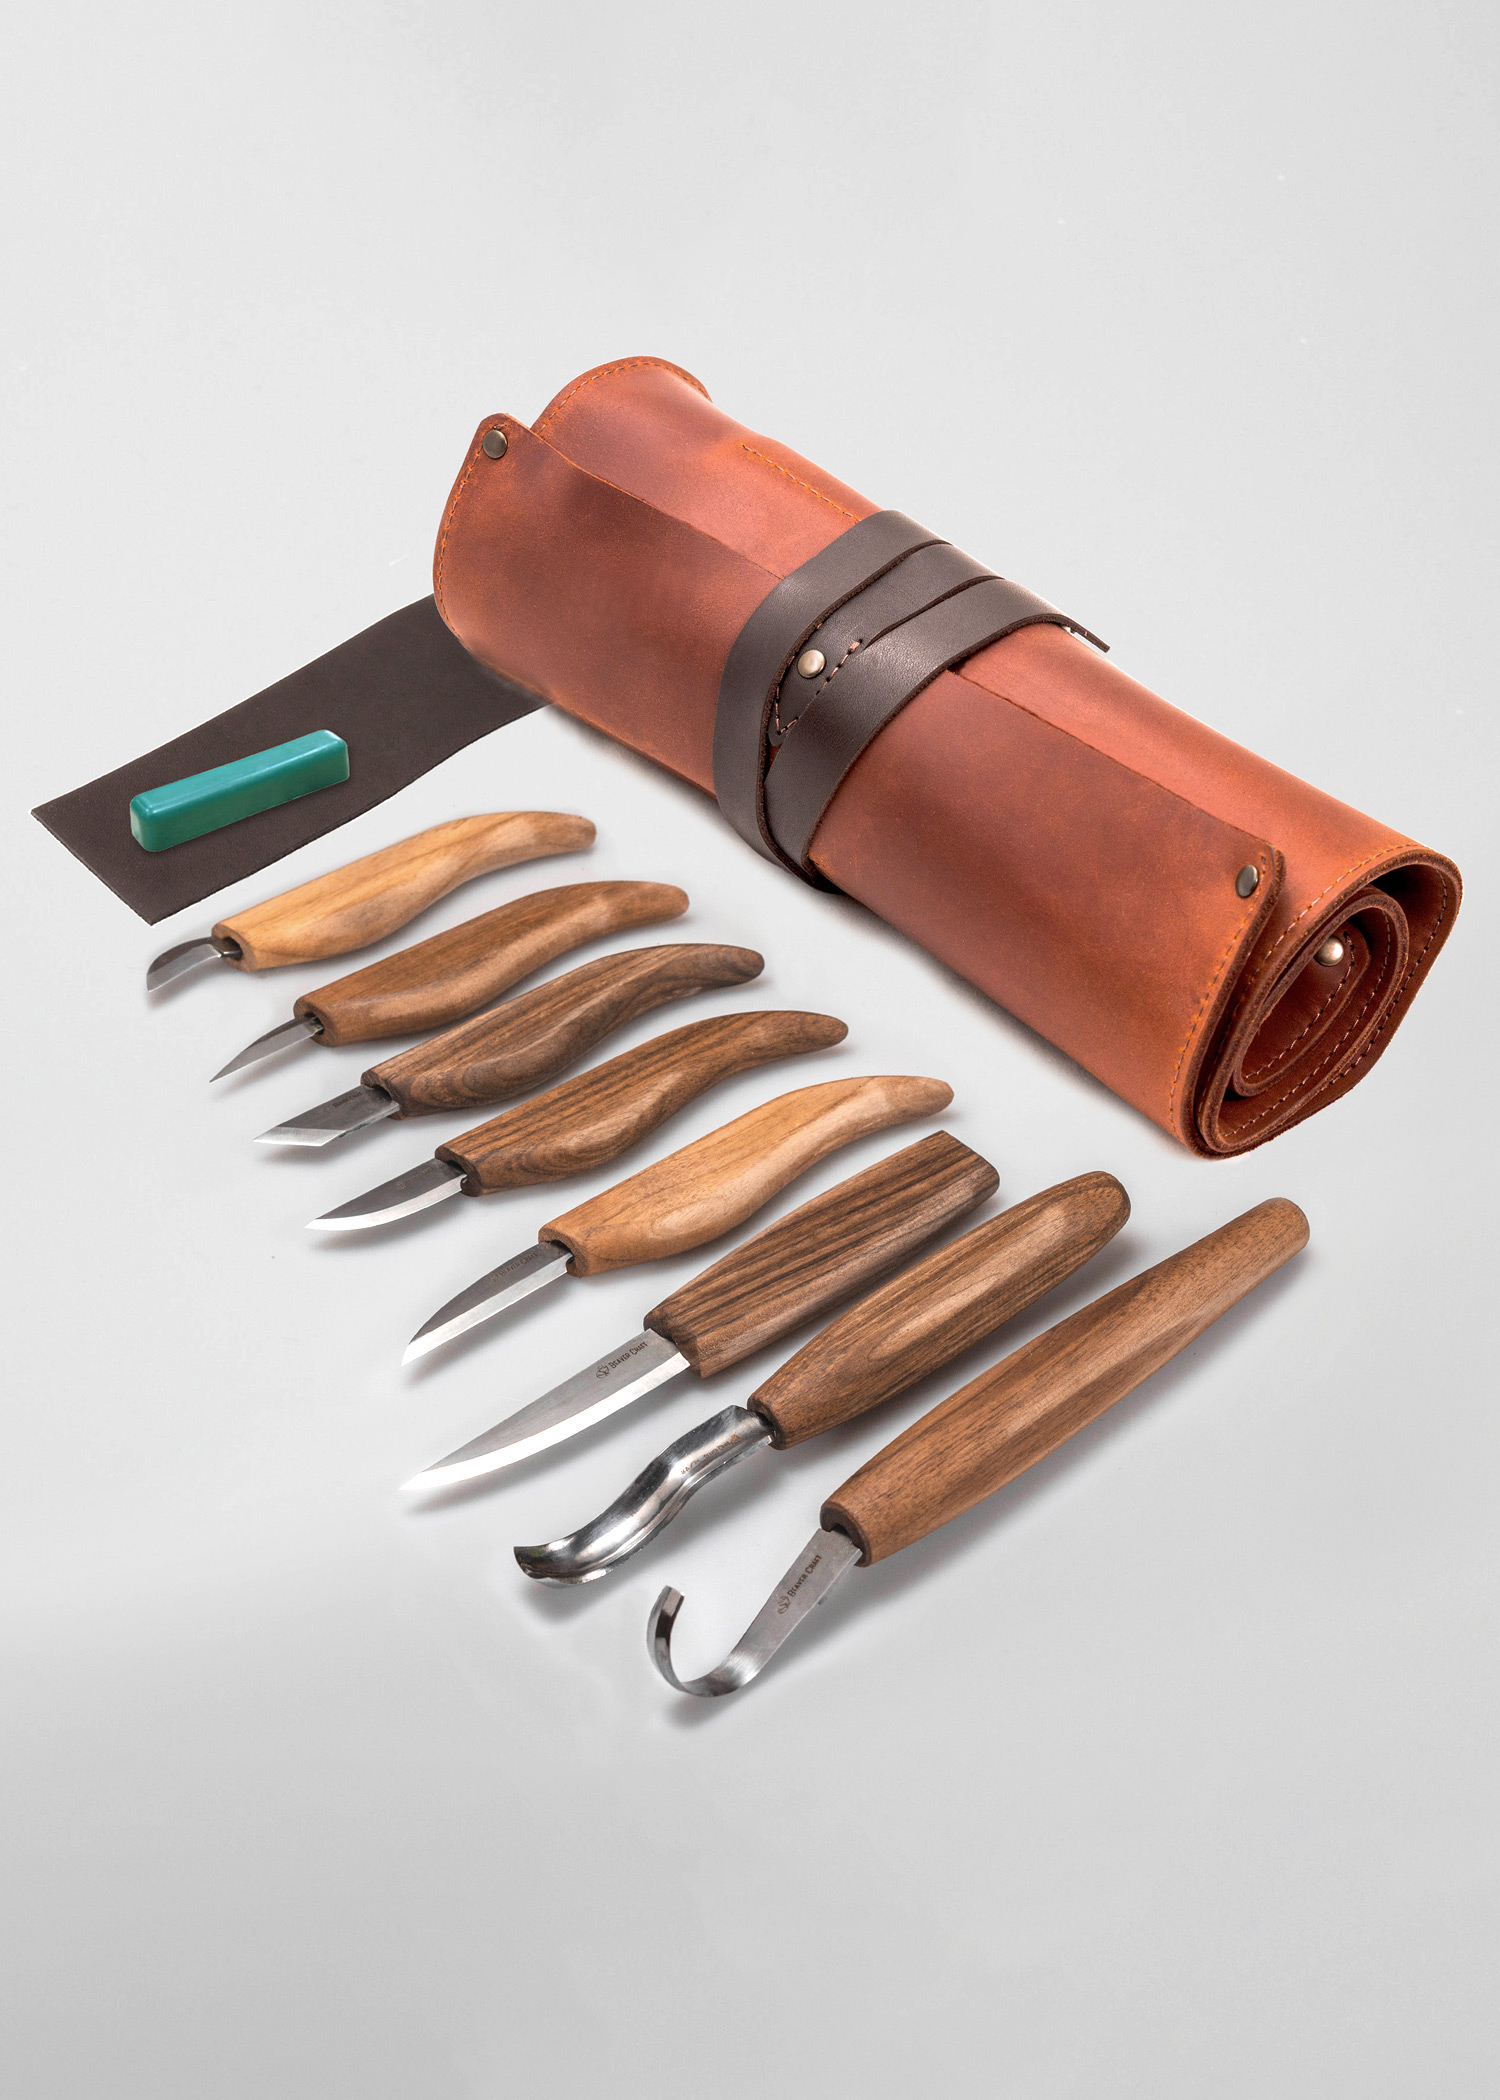 bc-s18x_beavercraft_deluxe_holzschnitz-set_8_messer_rolle_carving_knives_couteau_nussbaum